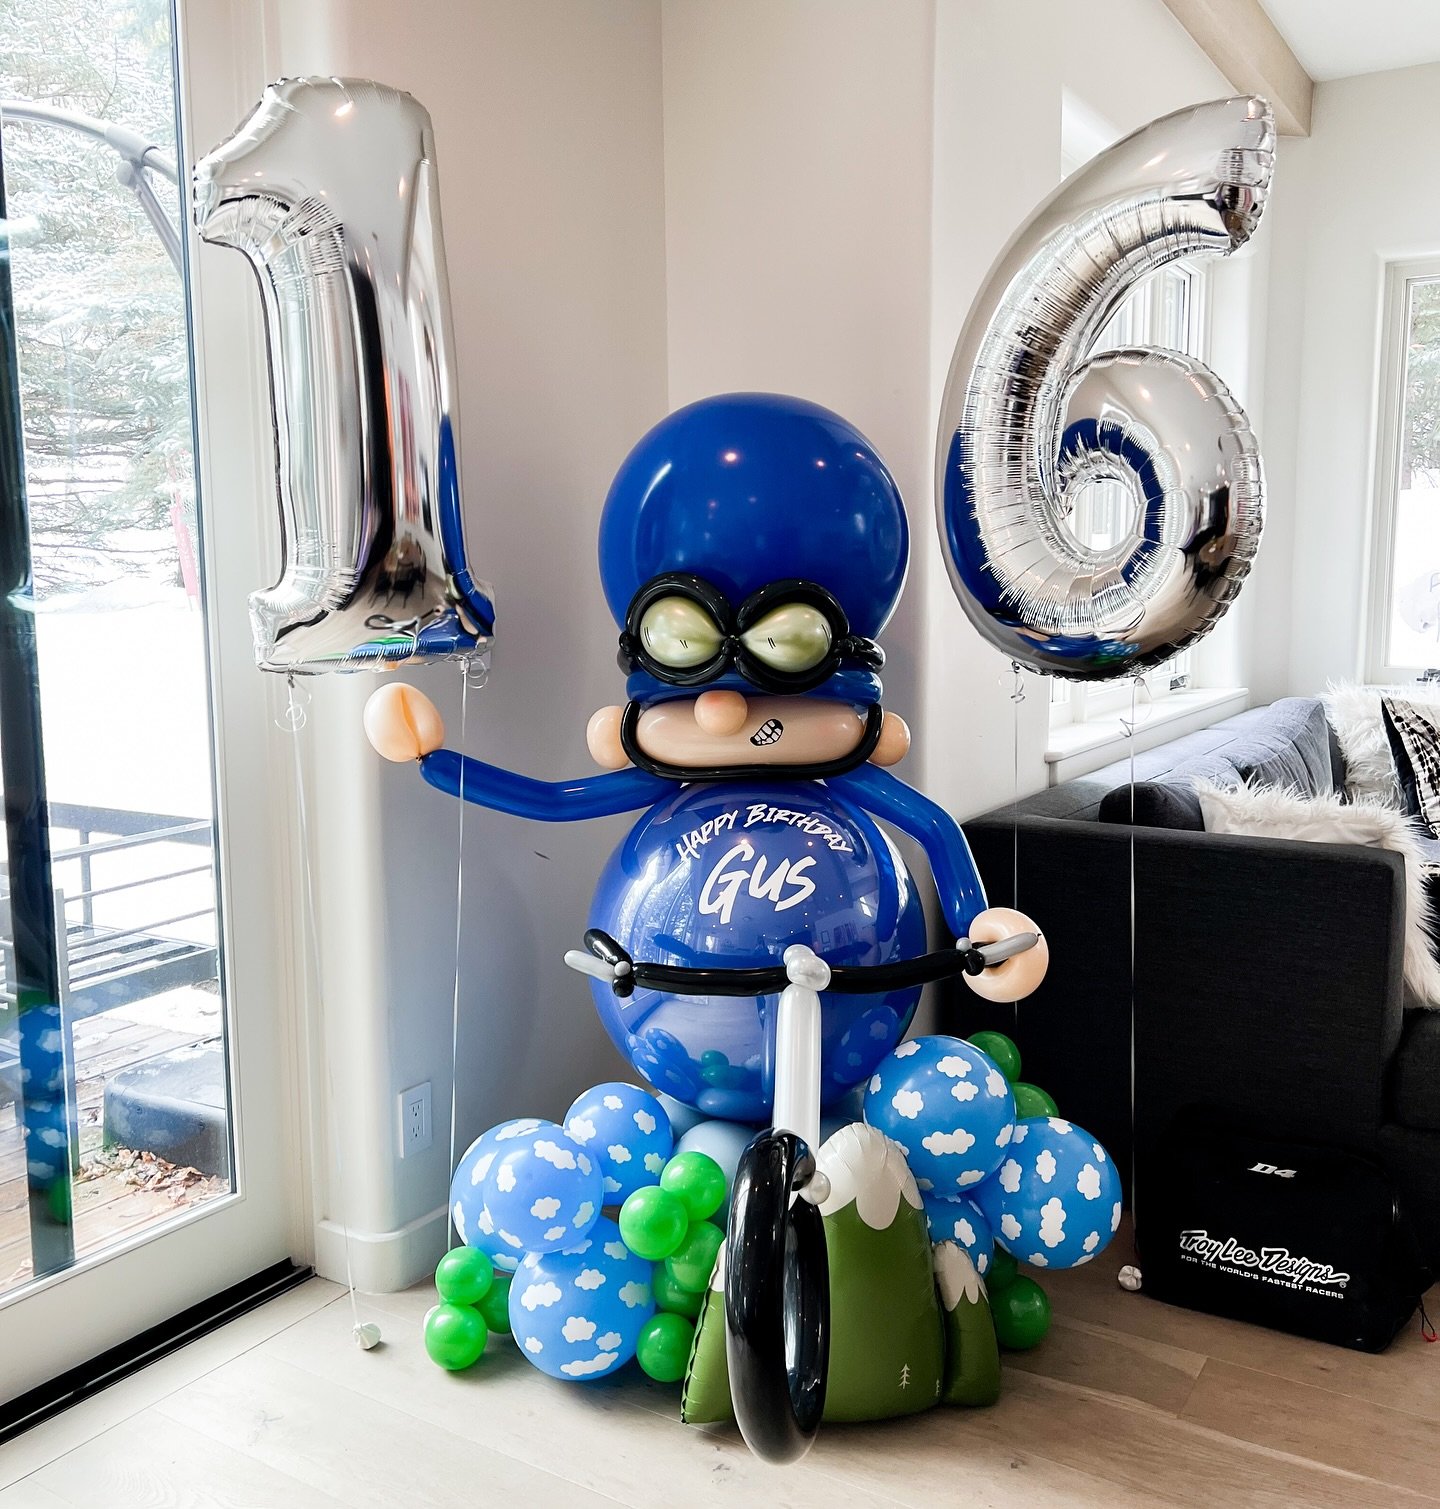 🏔️🚲Two wheels, one love! Happy 16th!! 
.

.

.

. #balloontower #balloon #birthdayballoons #birthday🎂 #balloons #organic balloons #balloonprofessional #balloonmosaic ballooncolumn #balloonarrangement #balloonmarquee #obsessed #🎈 #vail #balloonsty